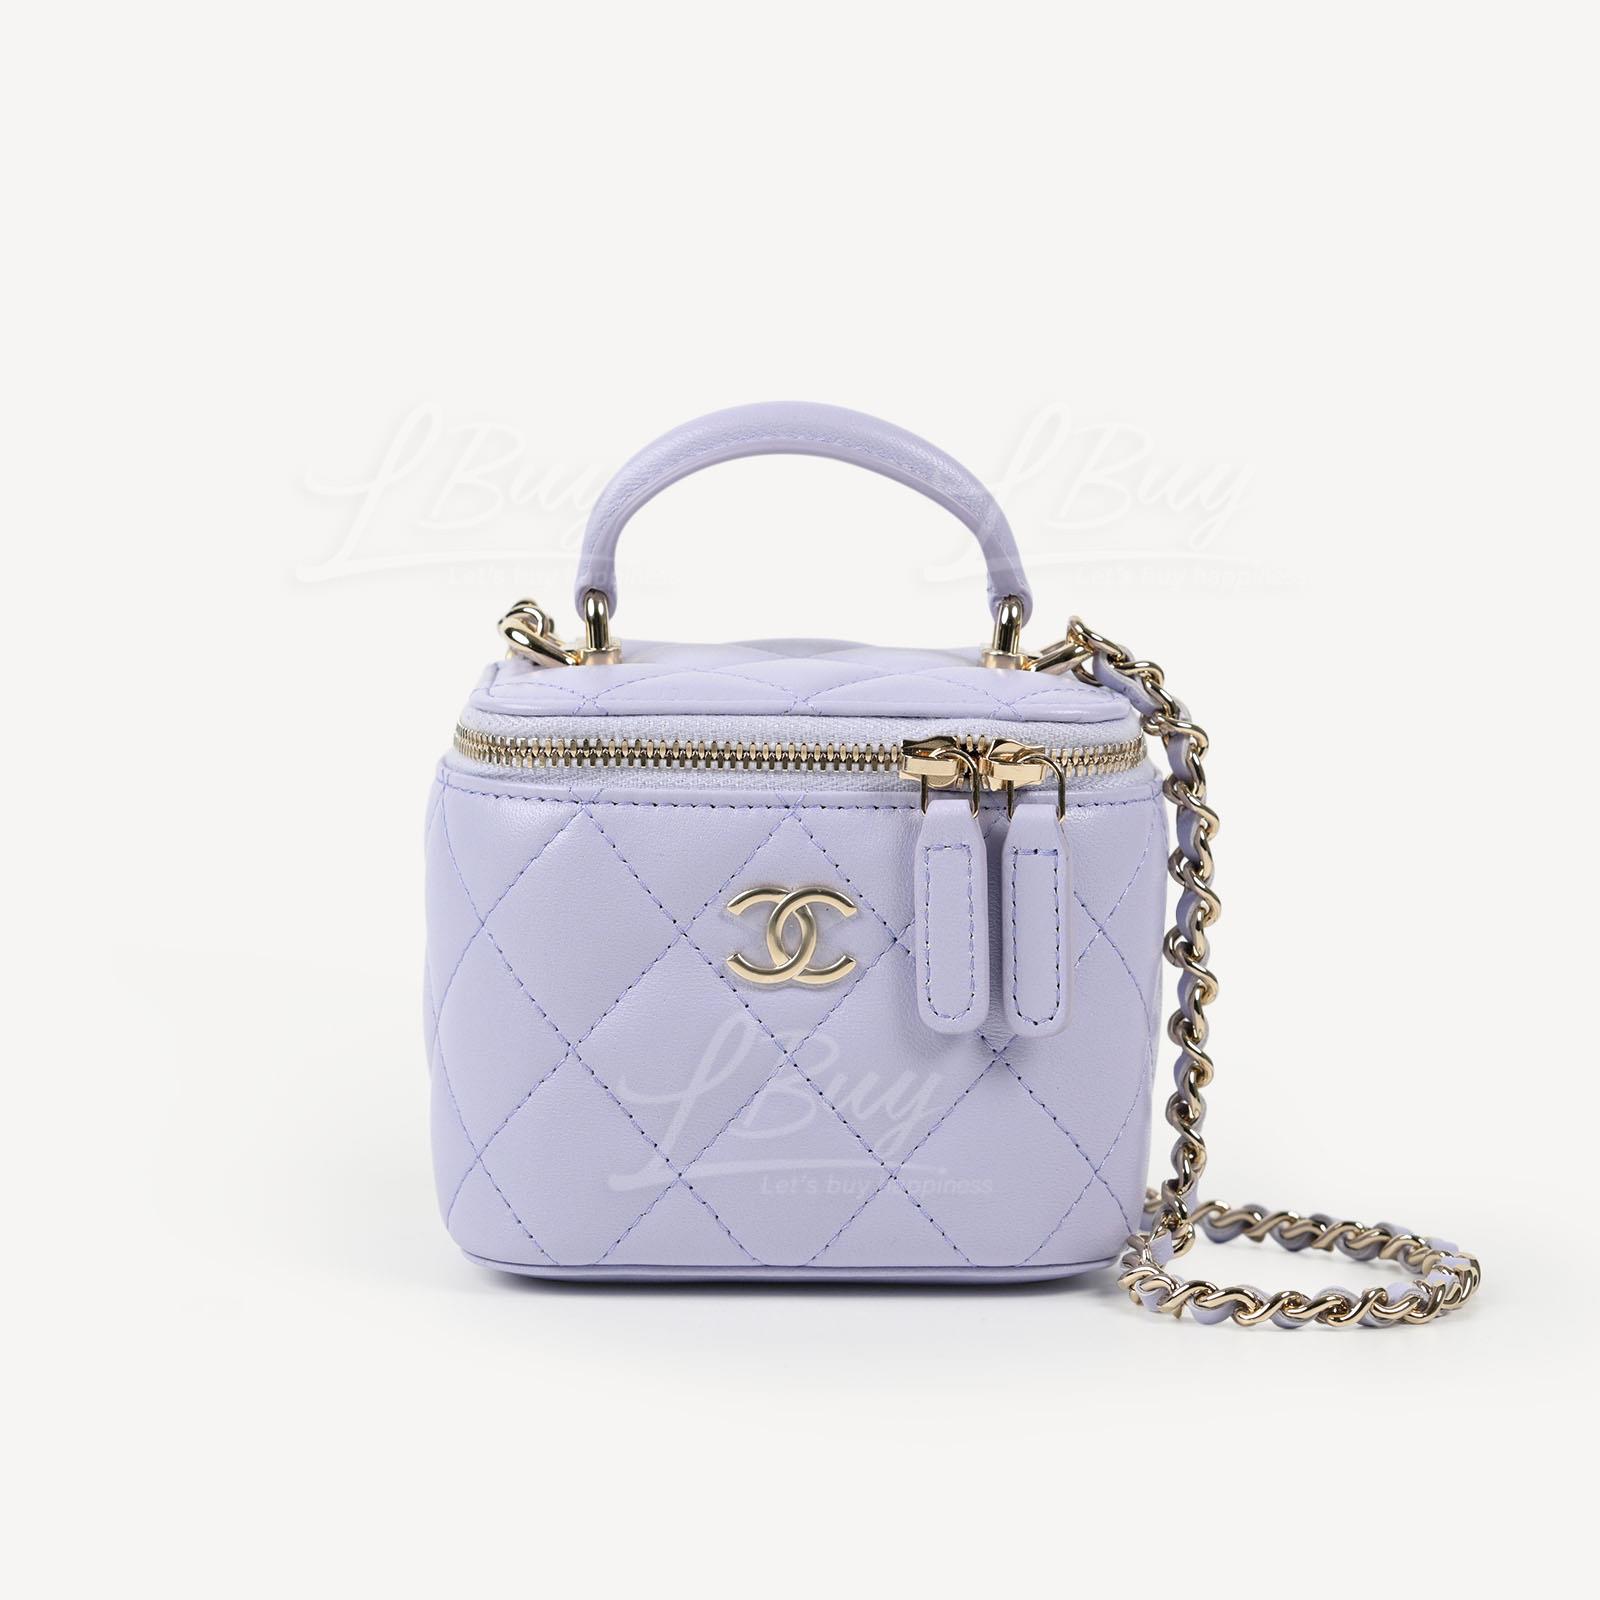 Chanel Light Purple Vanity Case with Top Handle and Chain AP2198